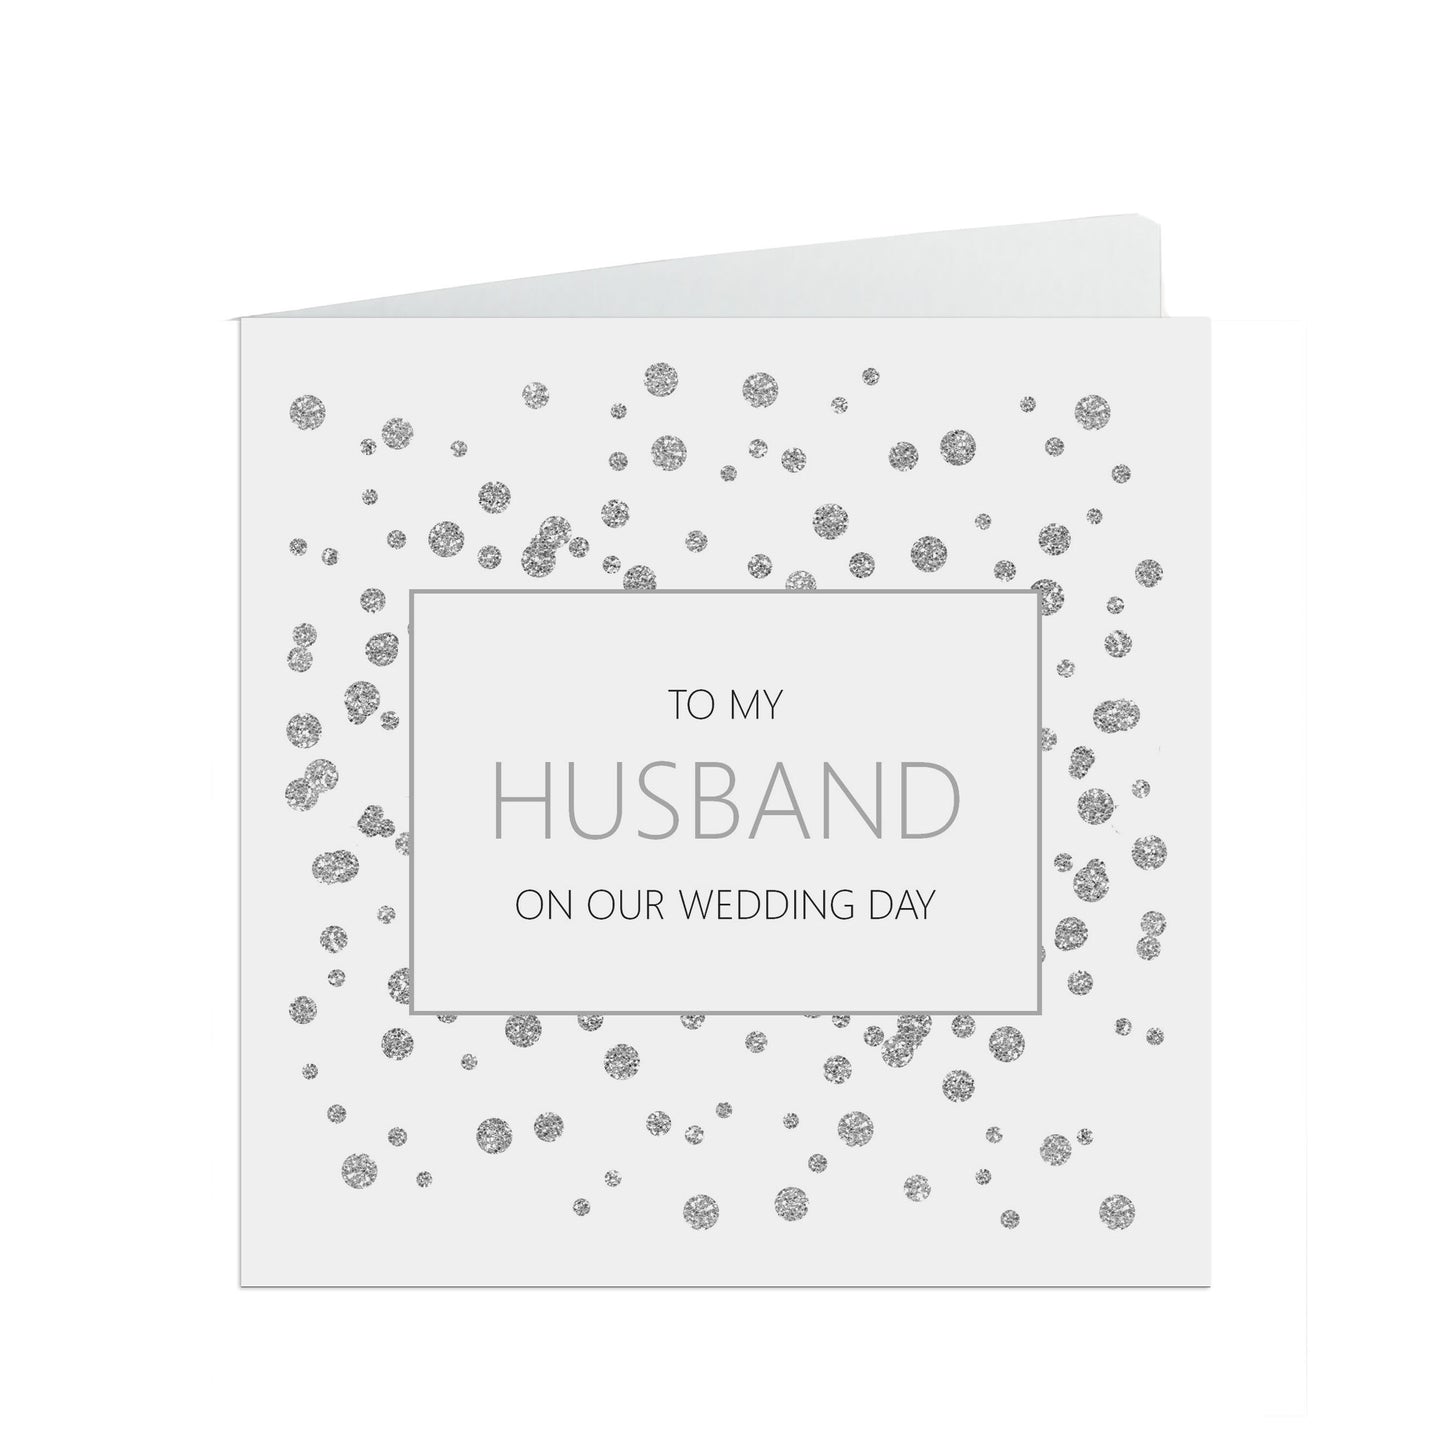 Husband On Our Wedding Day Card, Silver Effect 6x6 Inches With A White Envelope